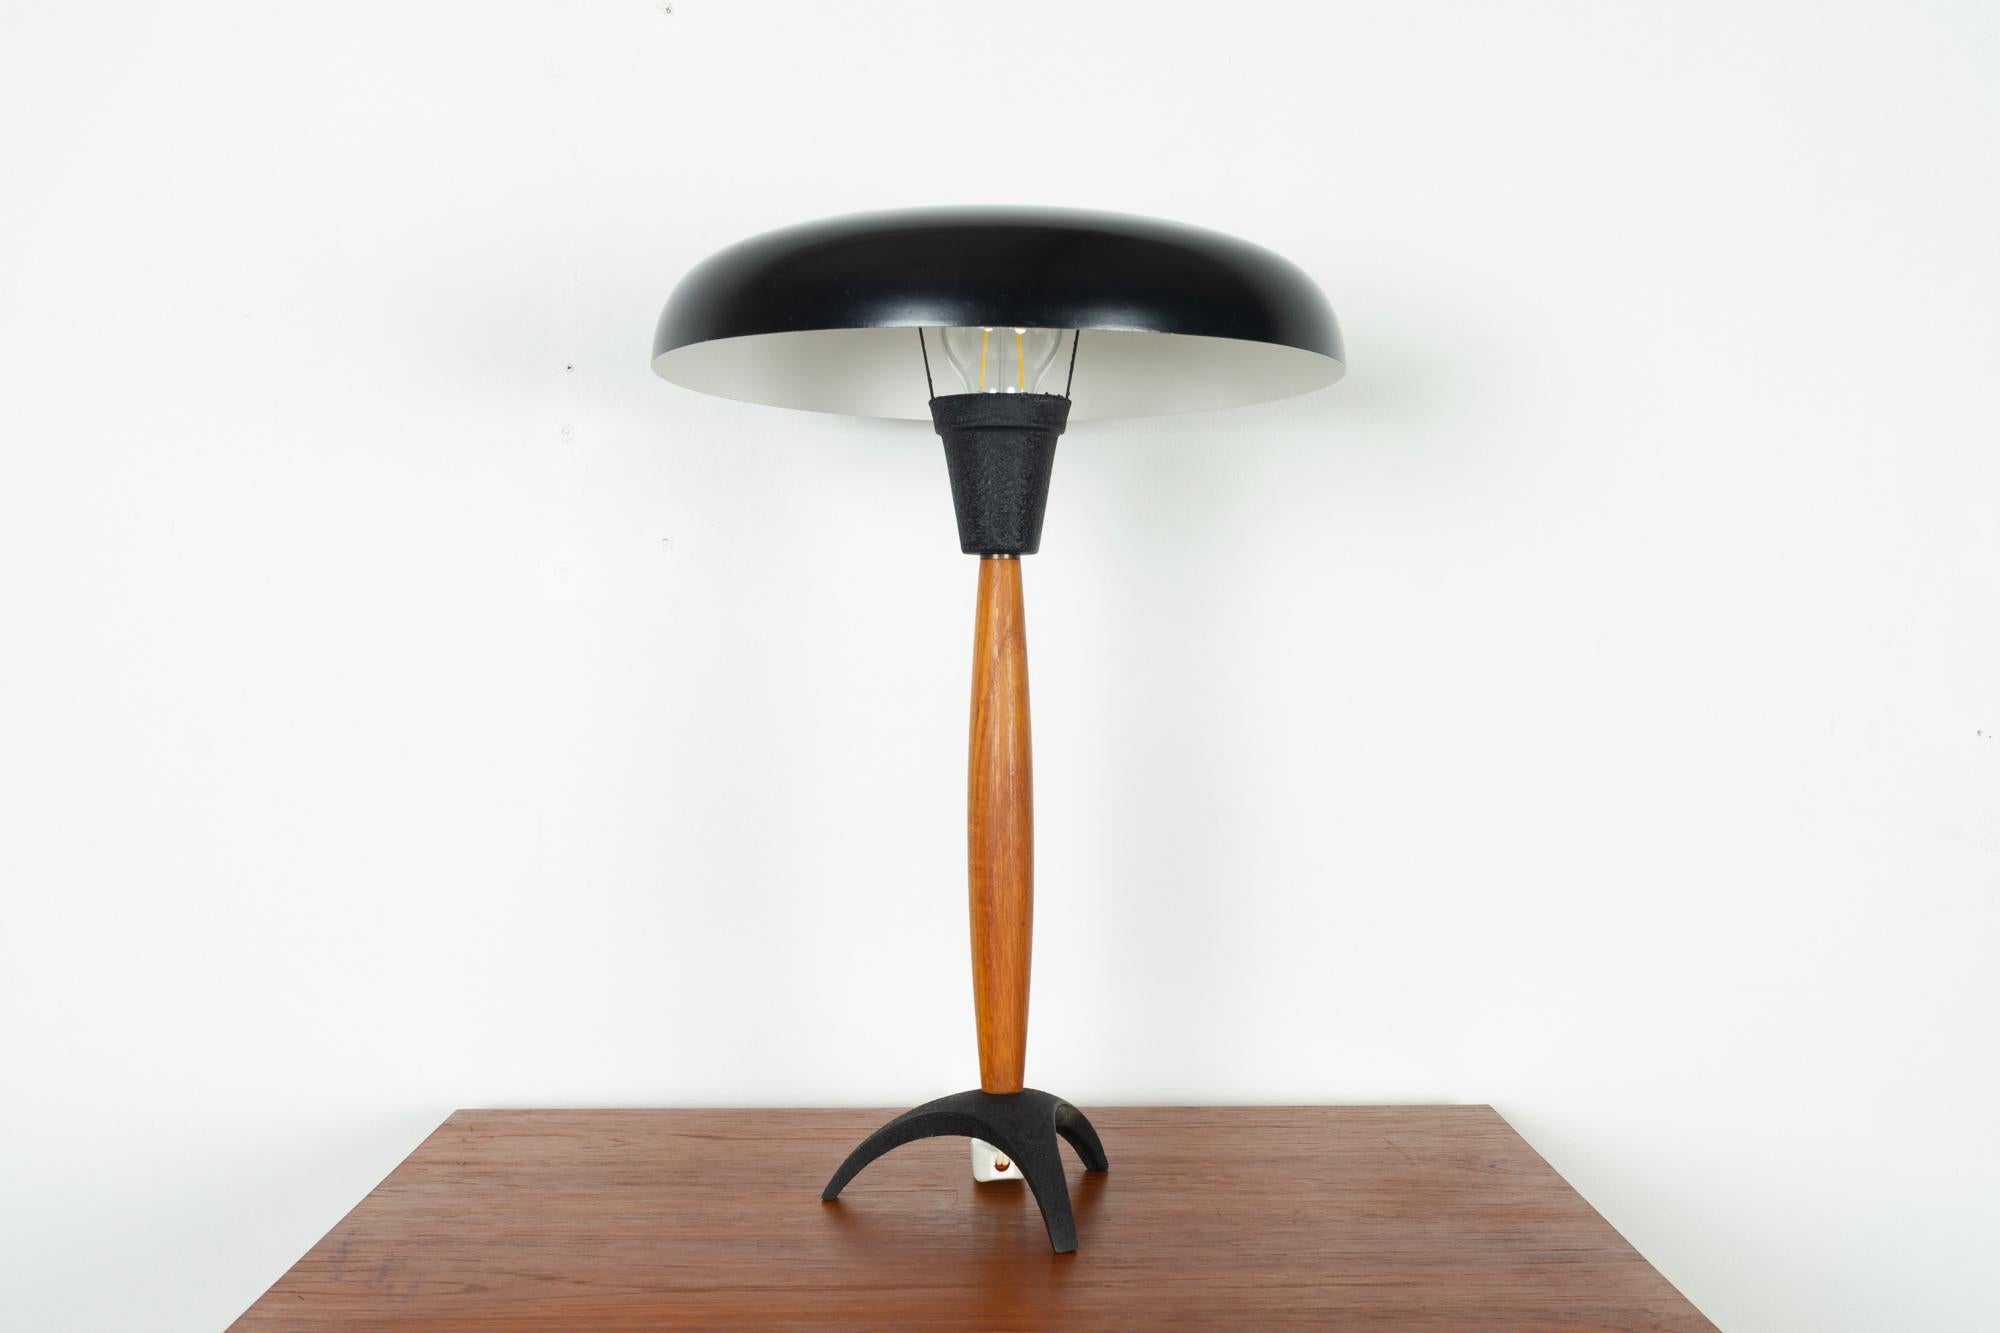 Vintage Danish table lamp 1960s
Space age desk lamp in teak and metal. Black tripod base with teak stem. Mushroom shaped shade in black aluminium. 
E26/27 socket. Switch on the cord.
Good vintage condition. Small dings and scratches on the shade.